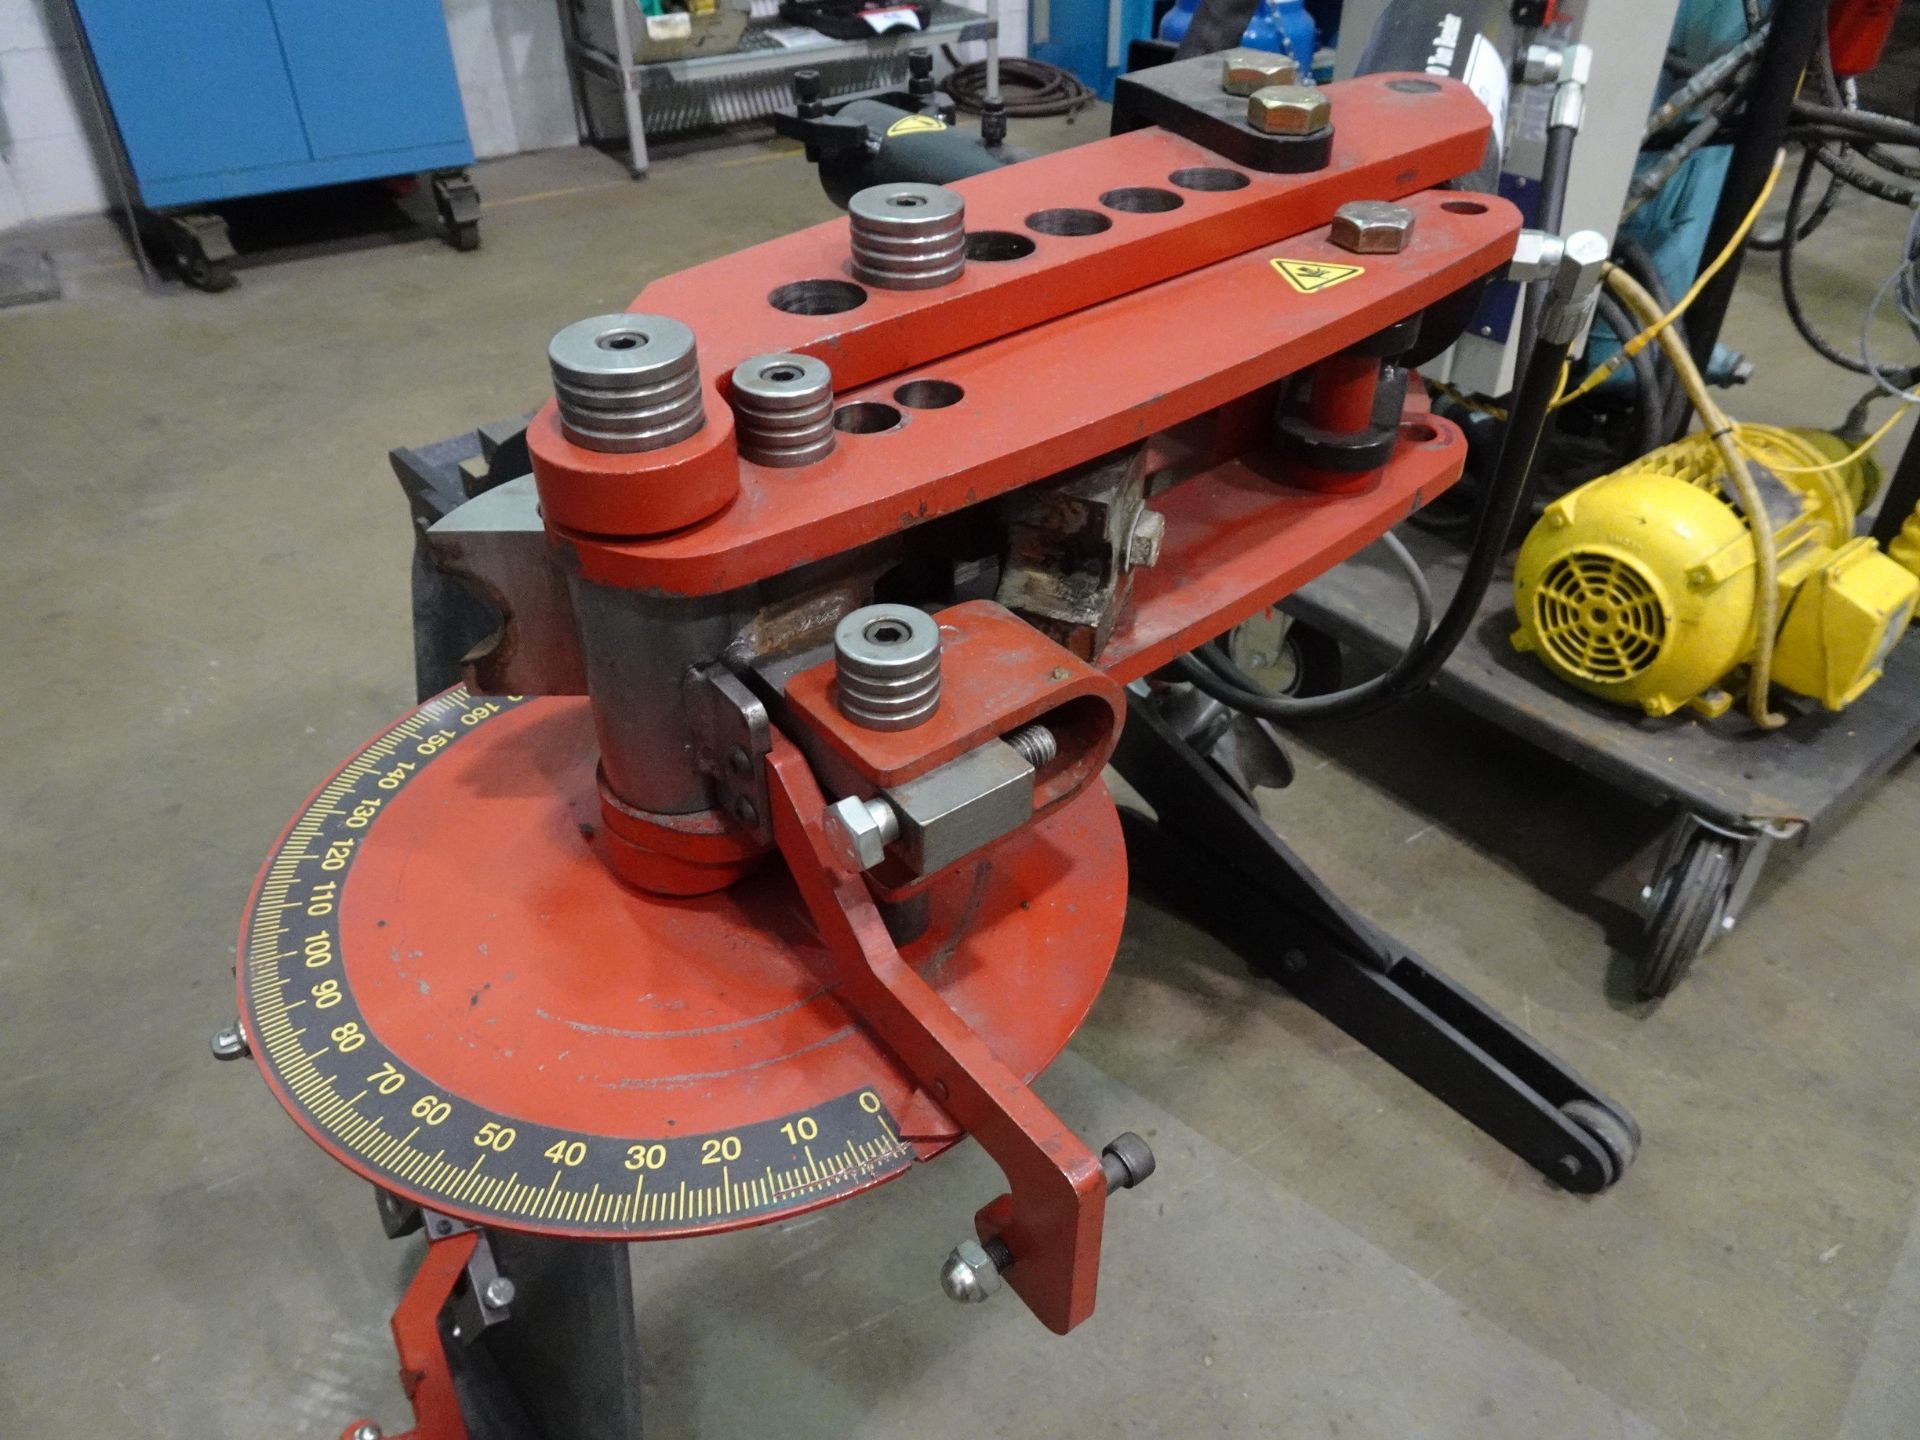 CST 10 TON CAPACITY, HYDRAULIC BENDER MOUNTED ON CASTORS C/W 3 H.P. HYDRAULIC POWER PACK MOUNTED - Image 3 of 14